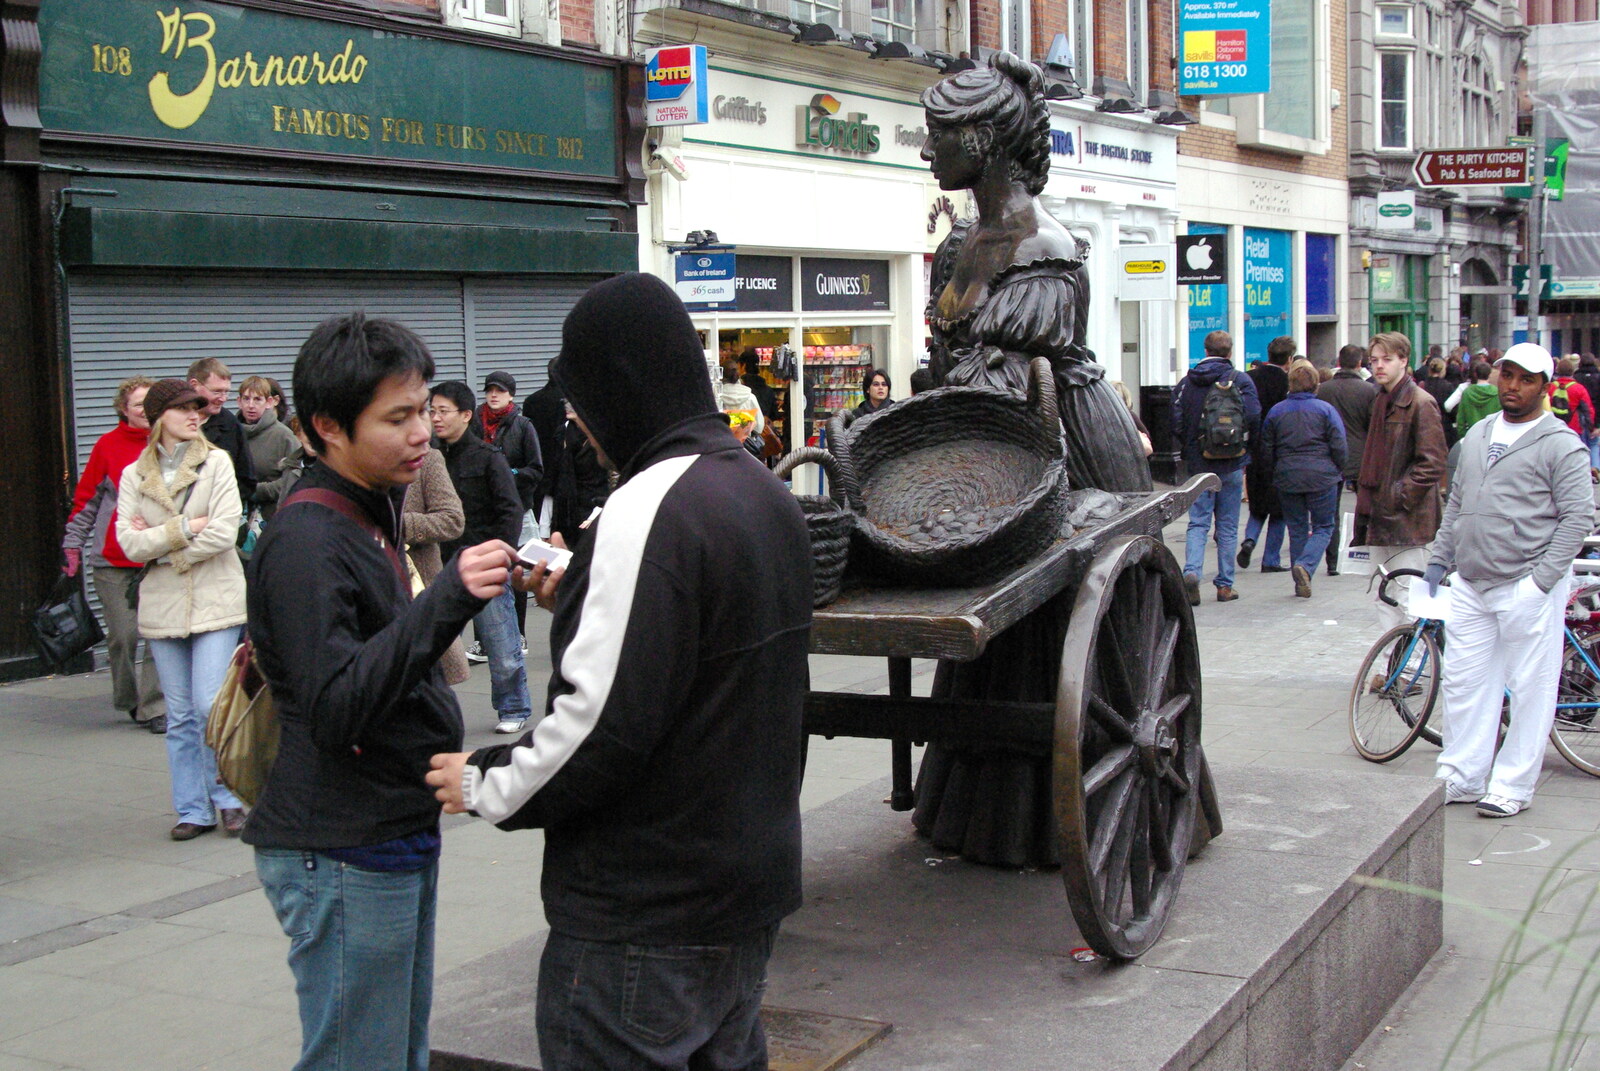 Easter in Dublin, Ireland - 21st March 2008: The Molly Malone statue in Dublin